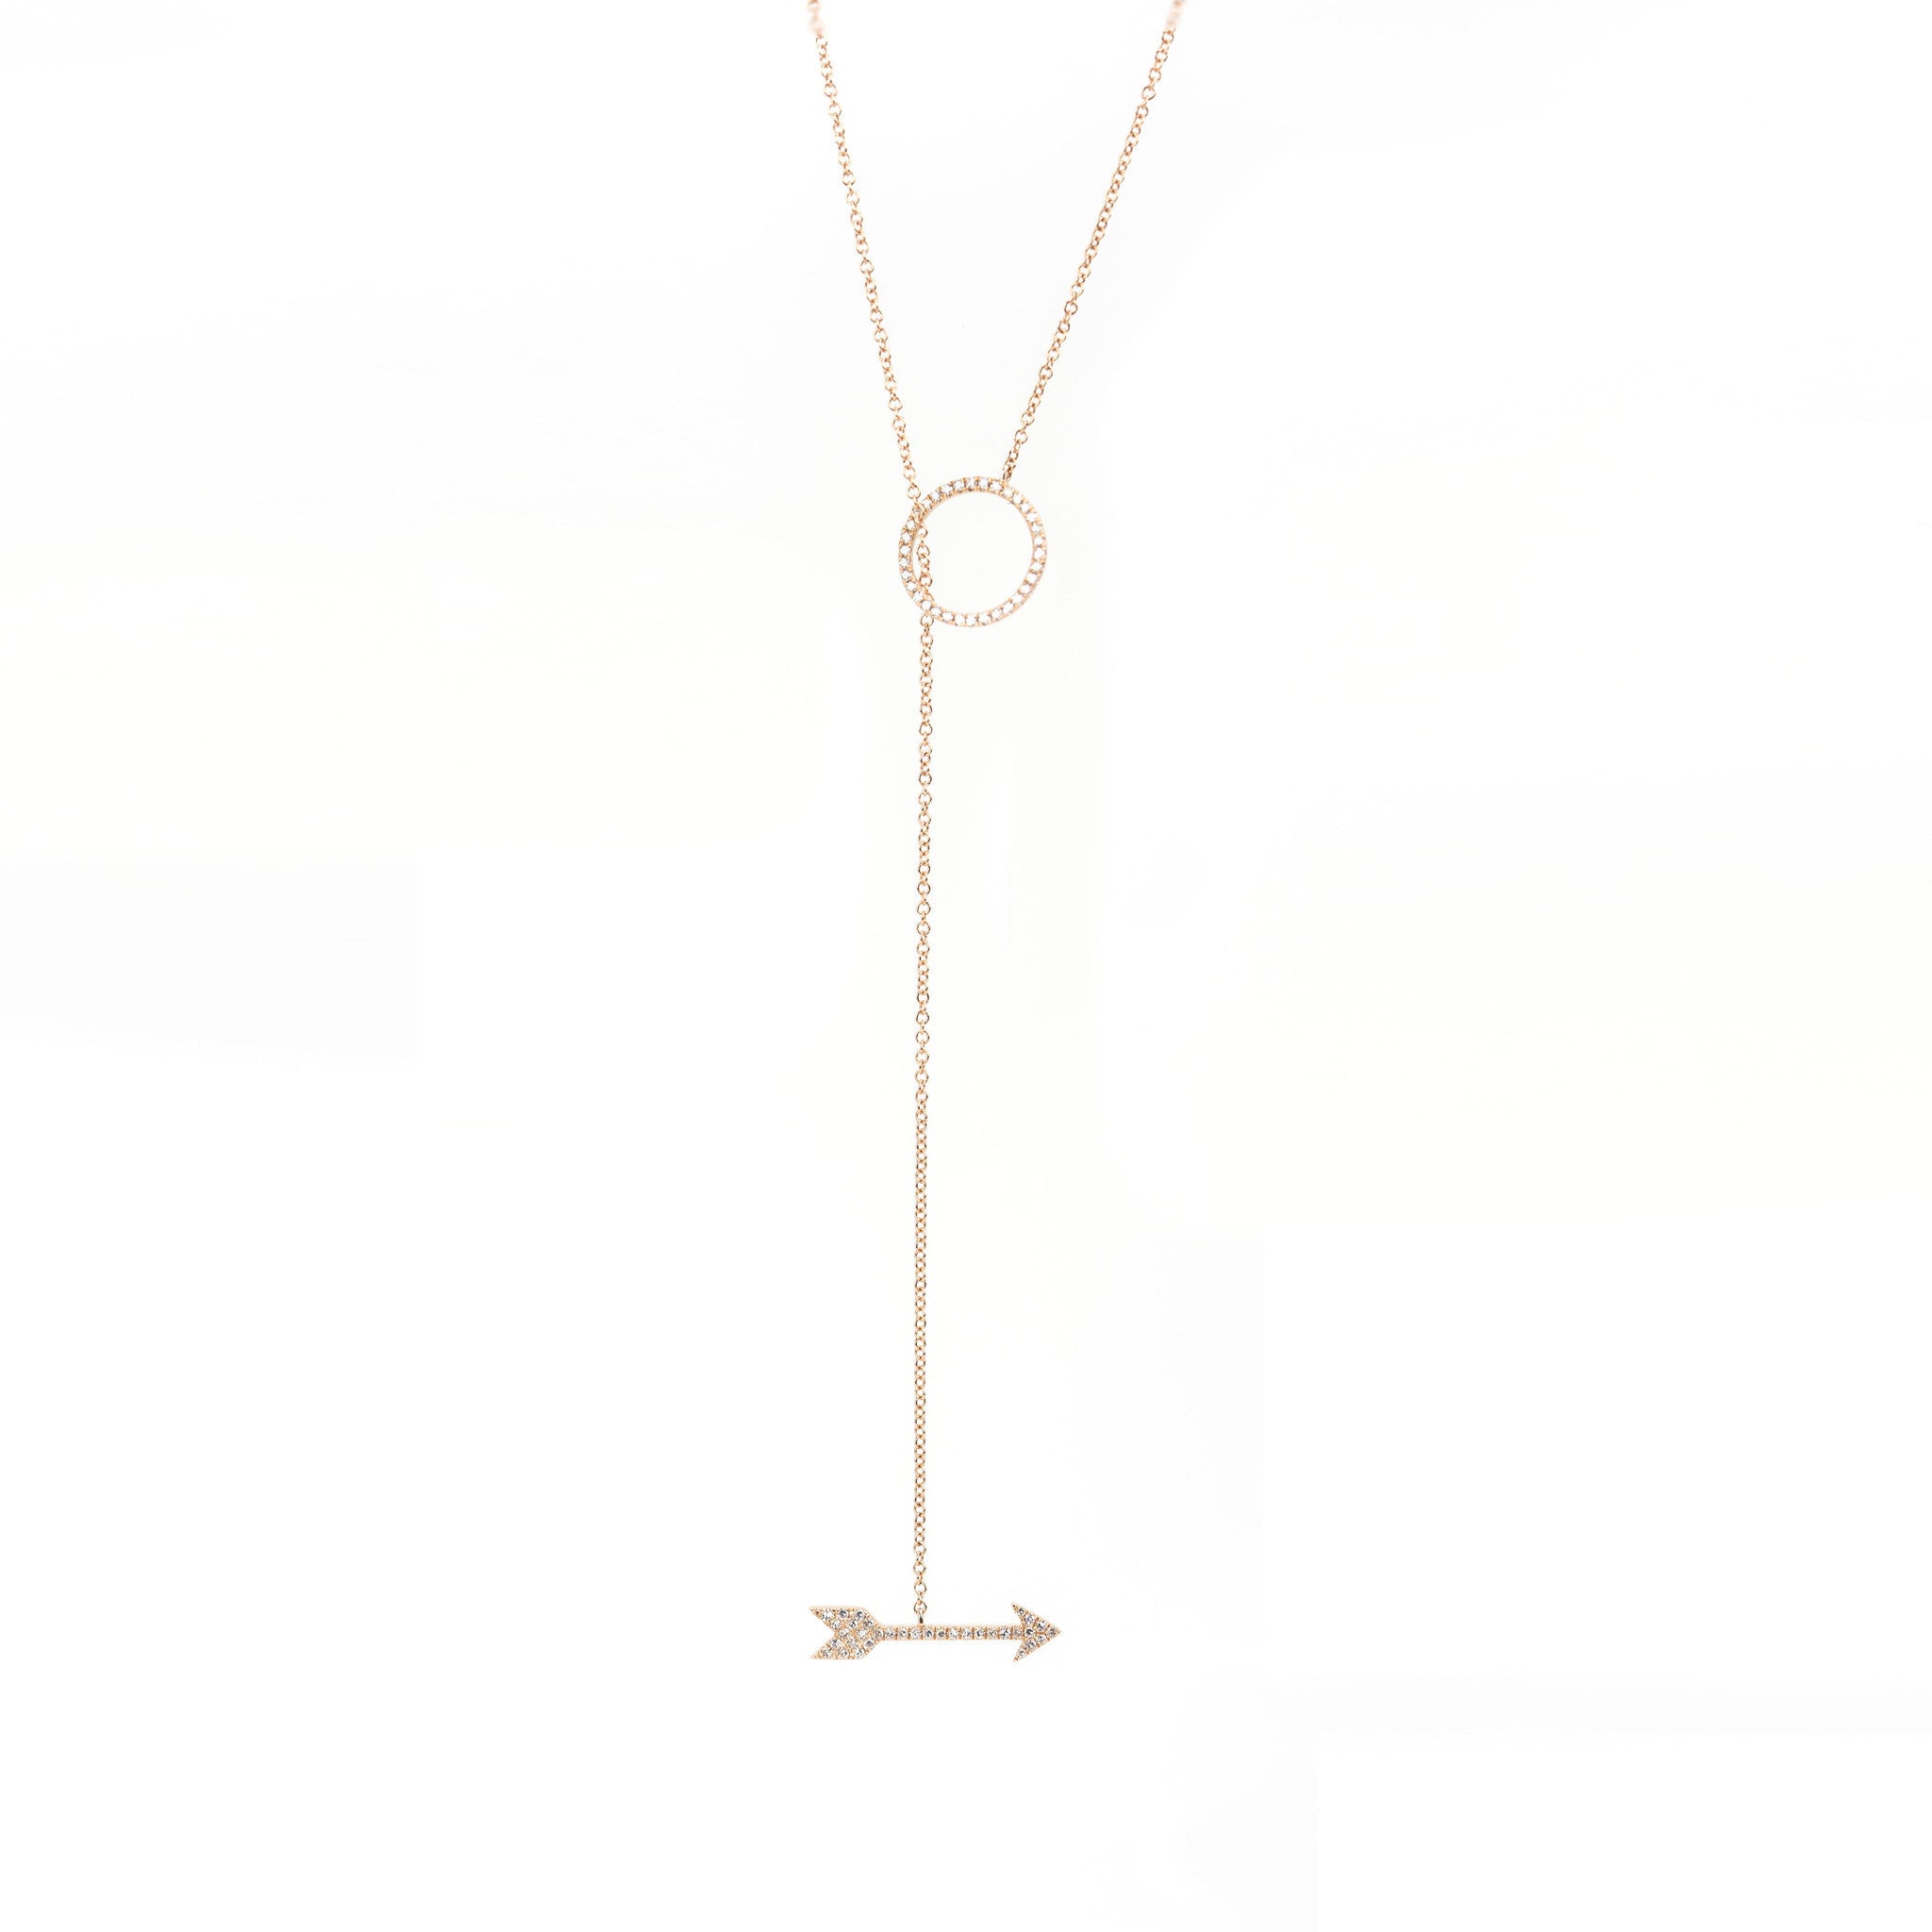 The Arrow Adjustable Lariat Necklace by Atheria Jewelry